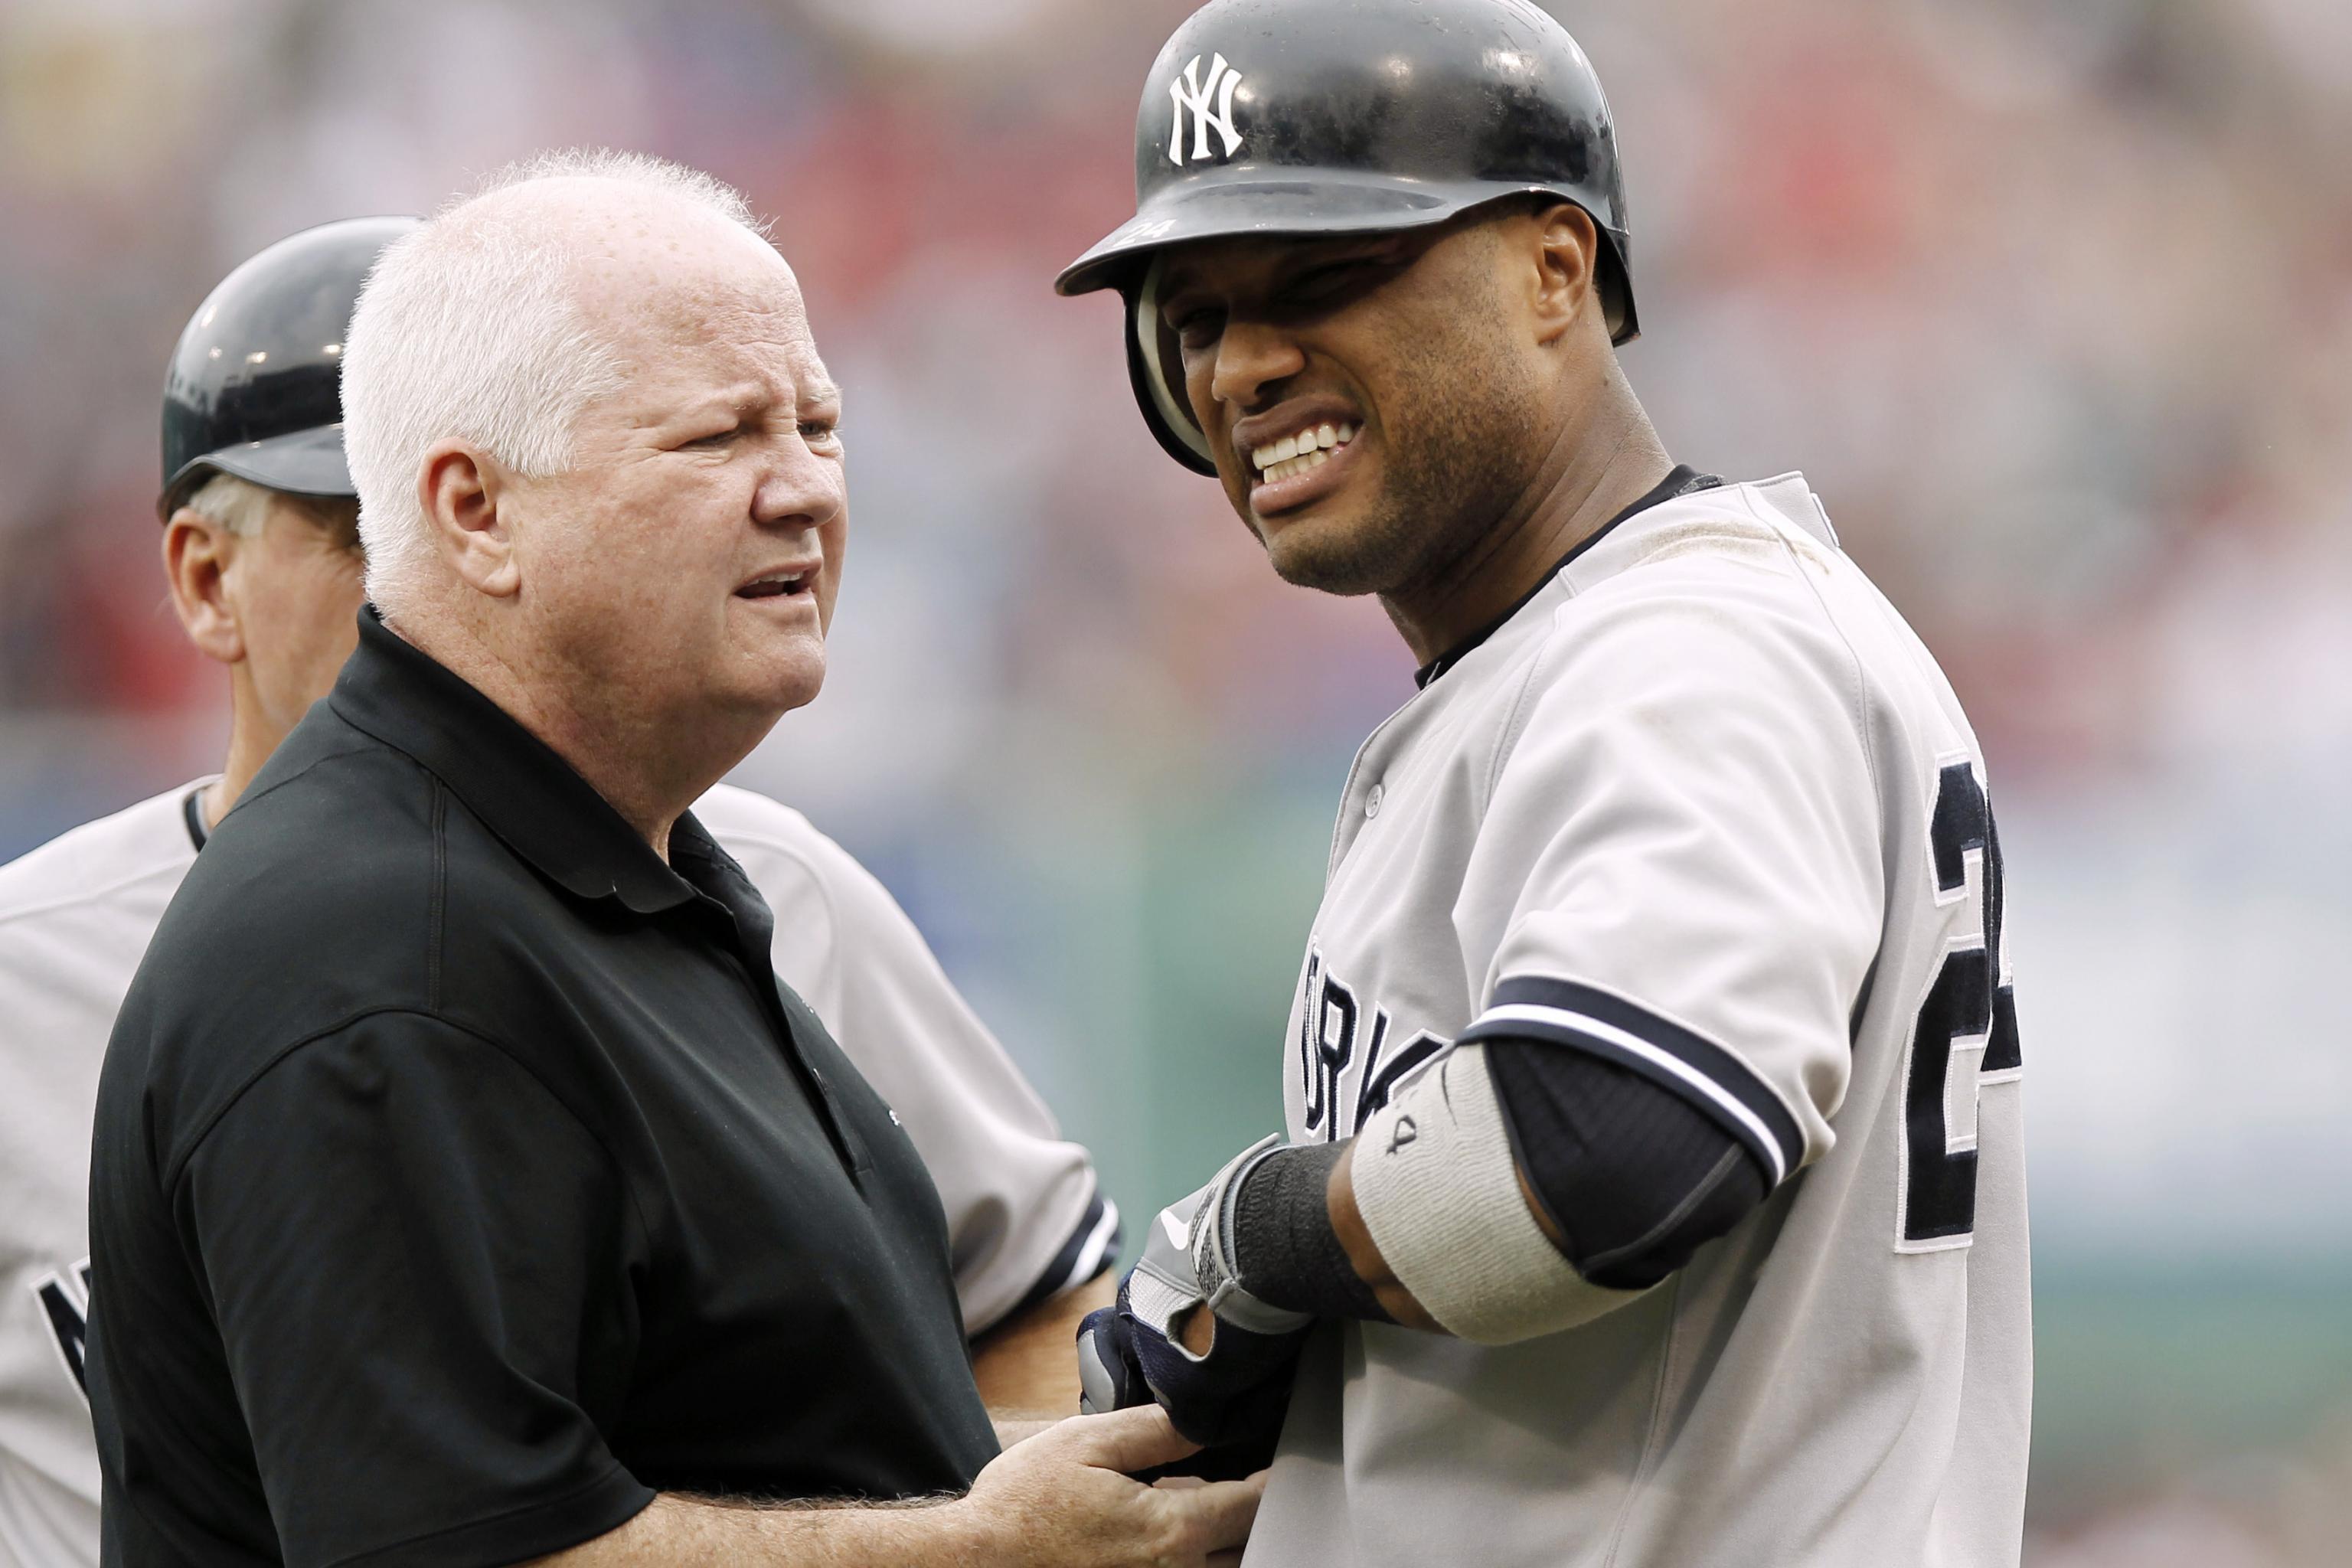 Teixeira confident Yankees can overcome injuries